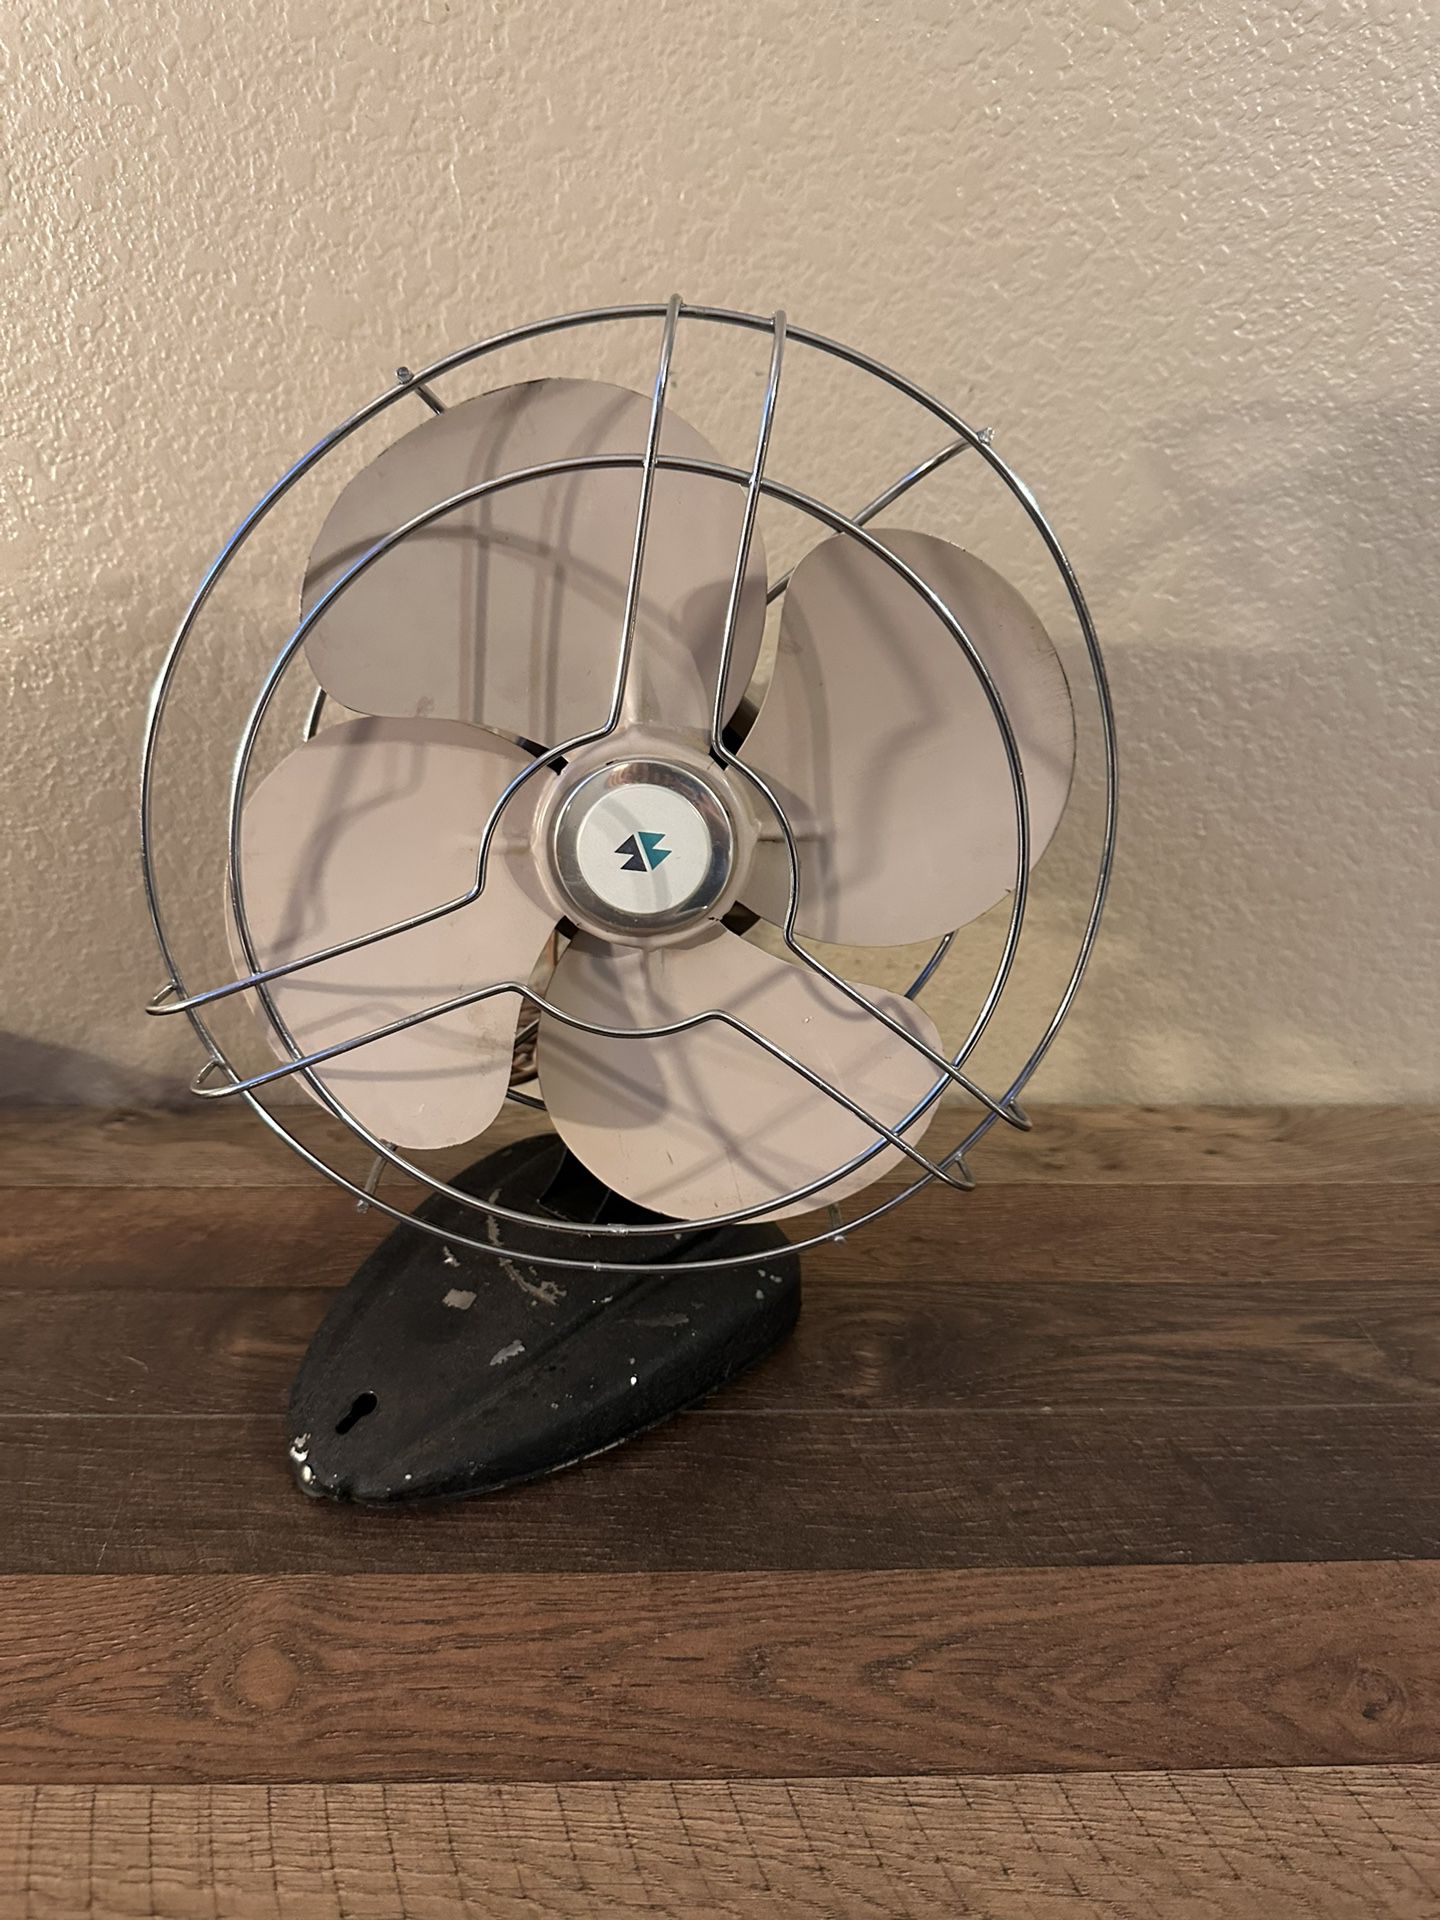 Vintage, Heavy Brown Metal Oscillating Electric Tabletop Fan, With Rare, Silver and Turquoise Double Diamond Logo